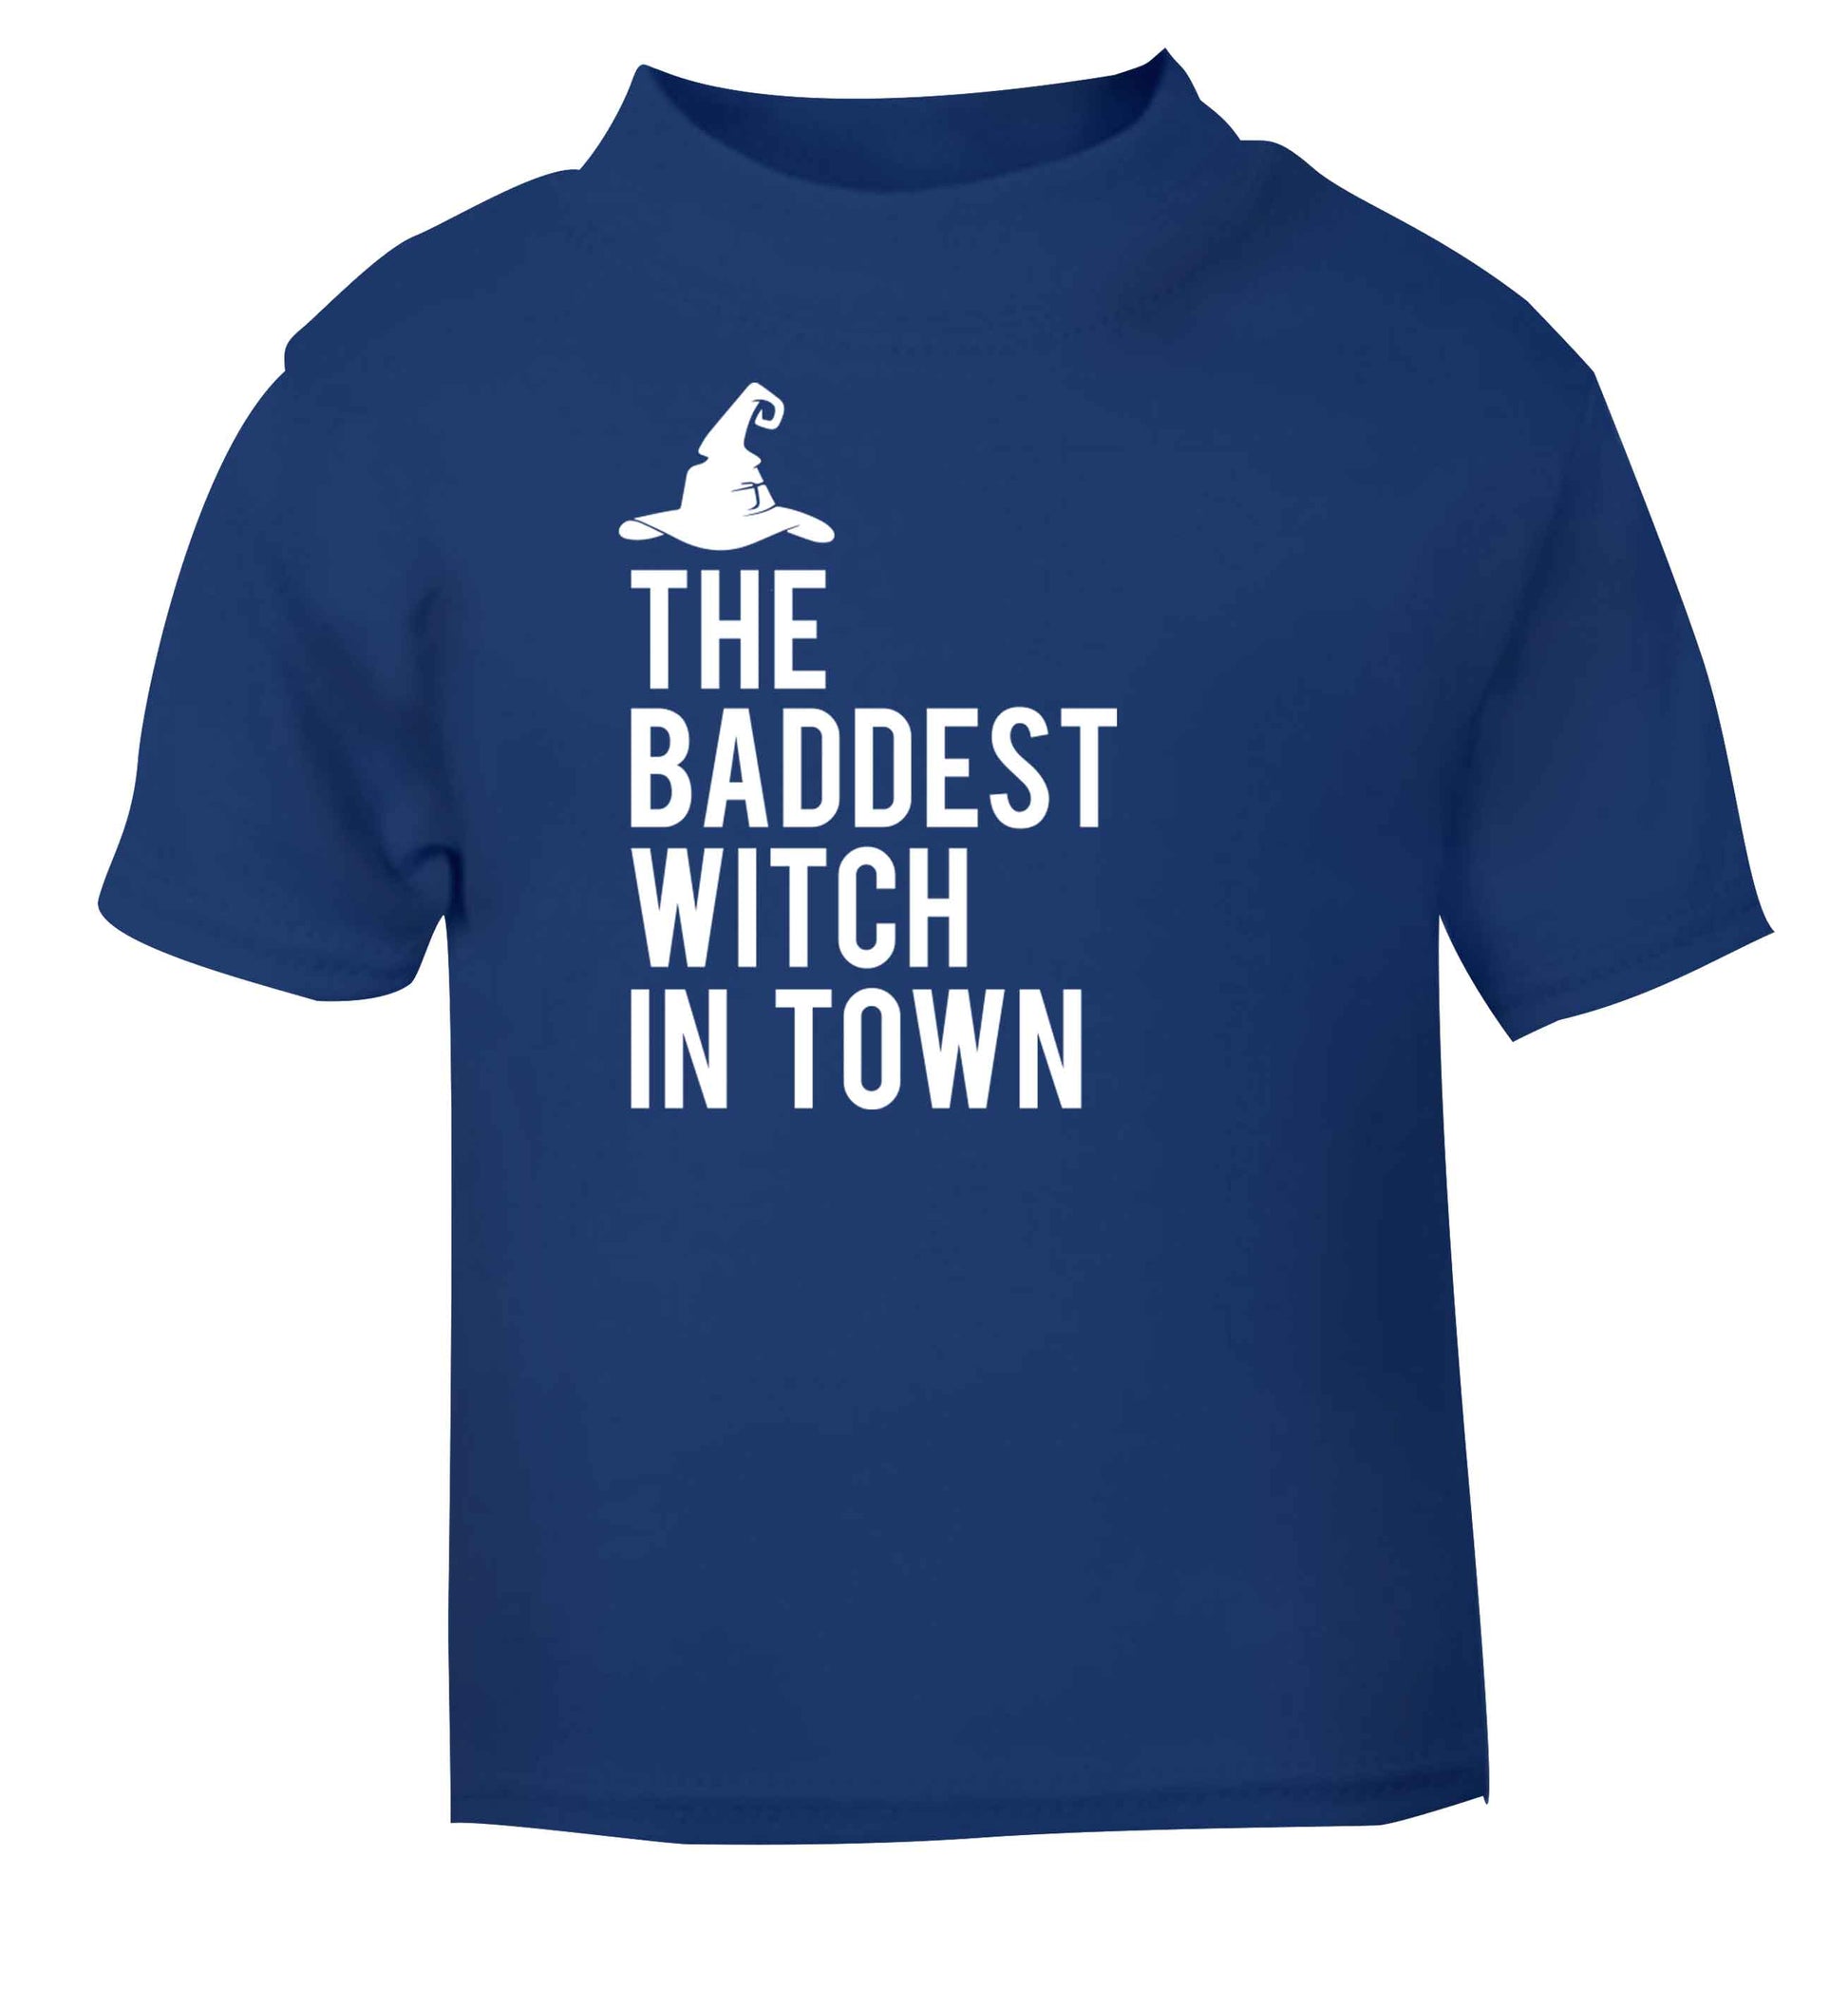 Badest witch in town blue baby toddler Tshirt 2 Years